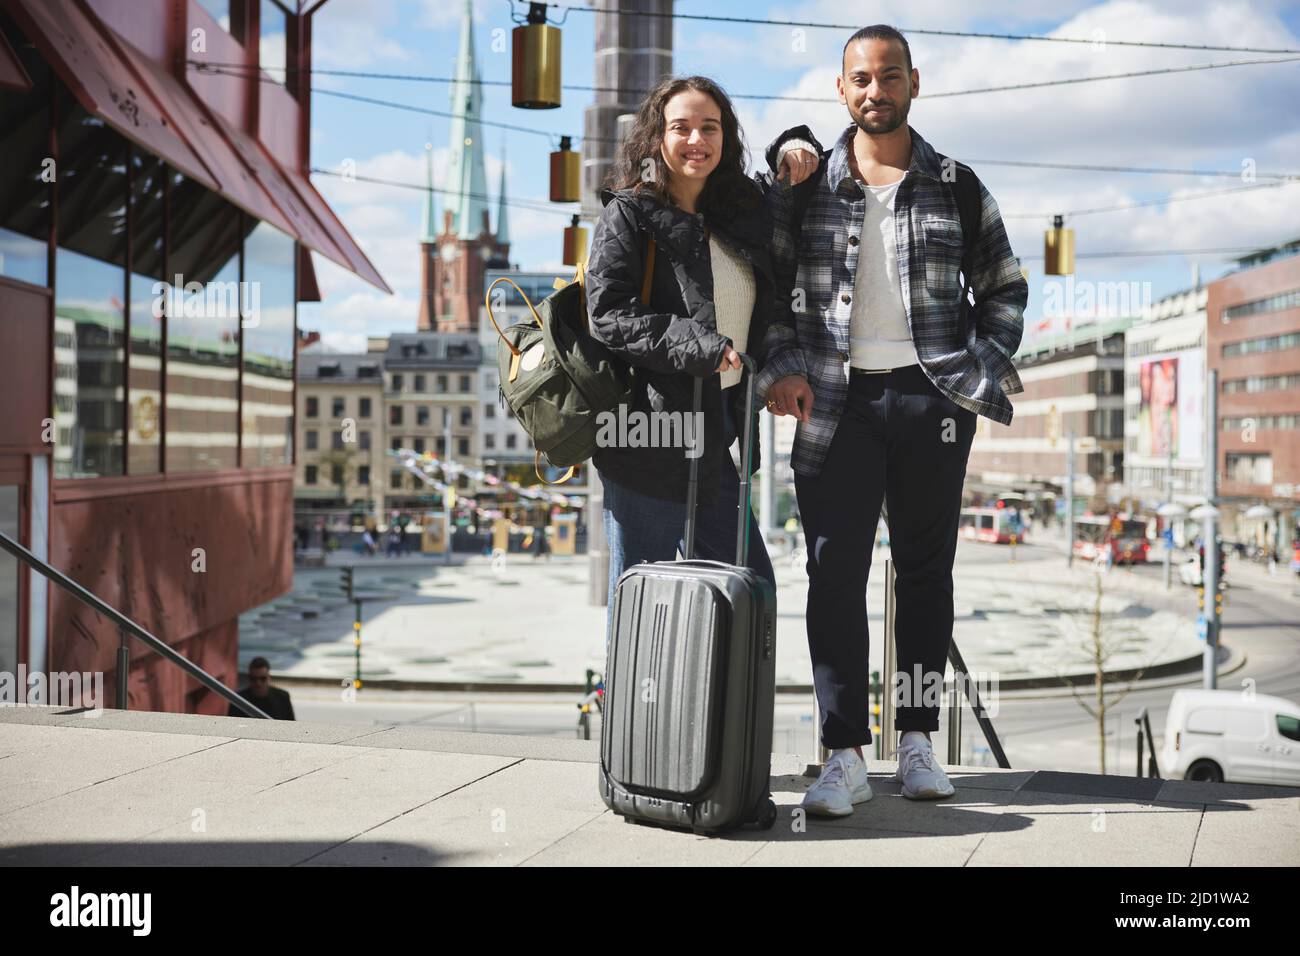 Portrait of smiling man and woman with luggage in city center Stock Photo